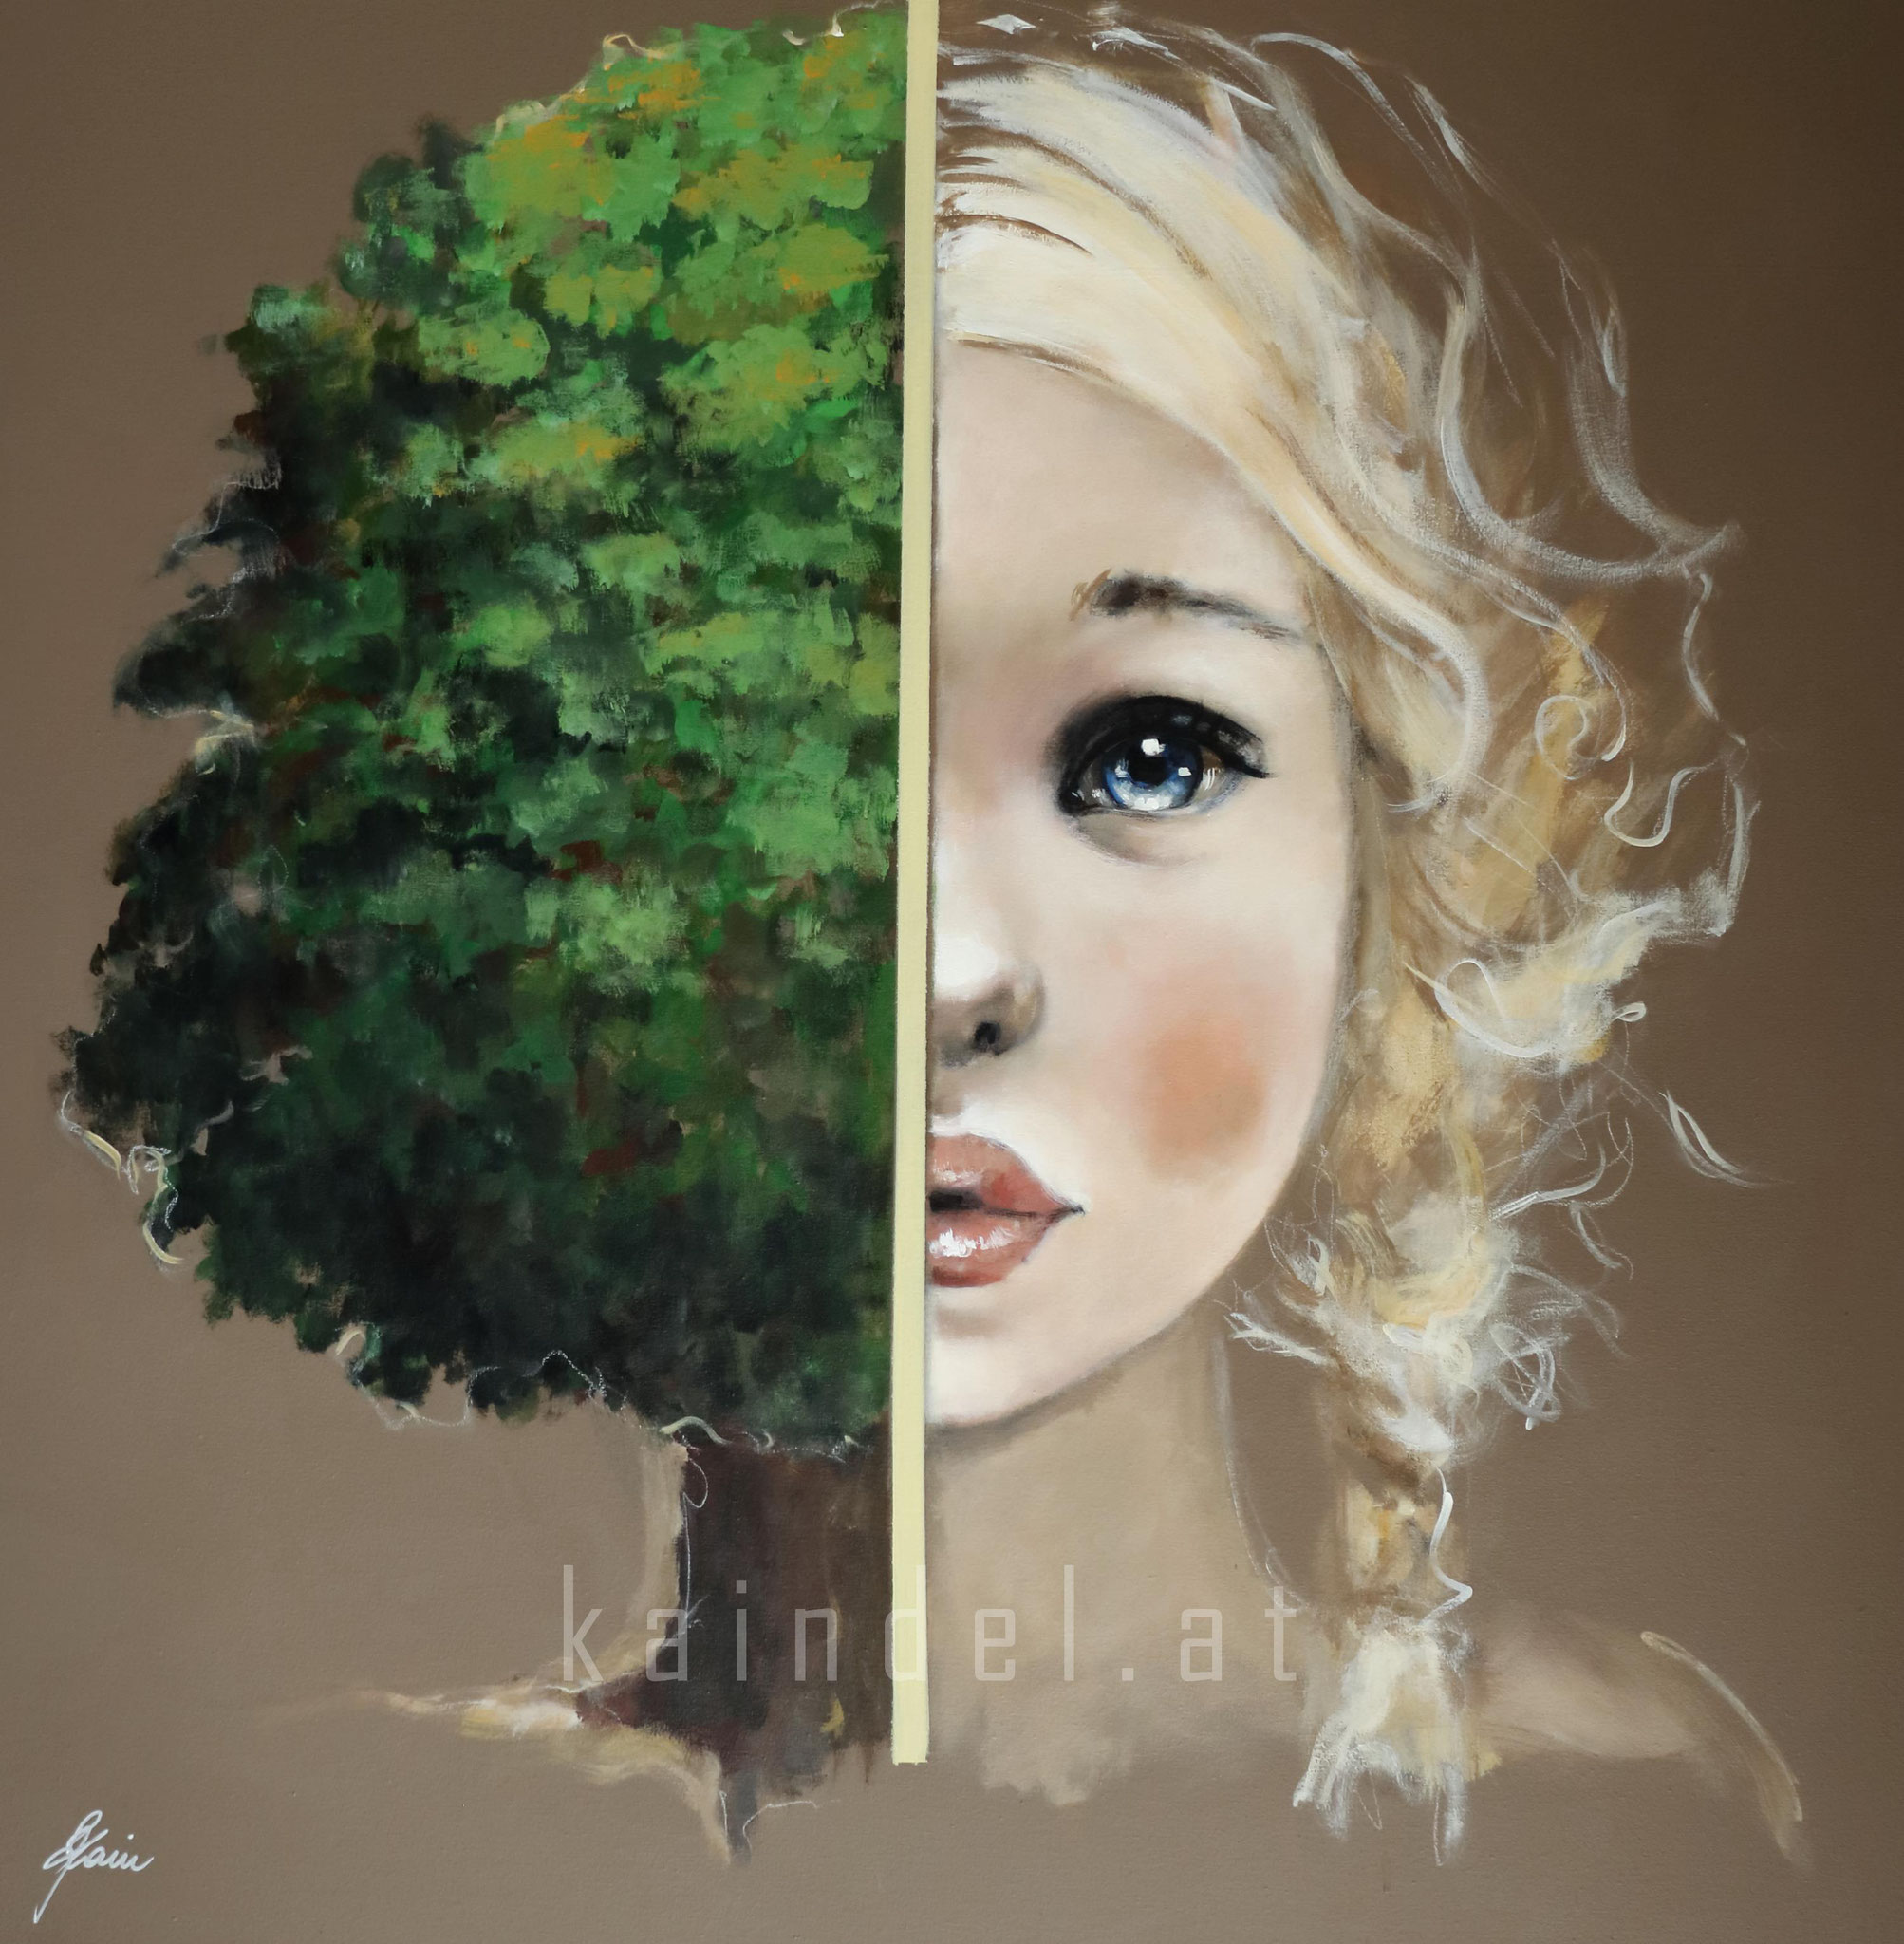 GIRL AND TREE 110 x 110 cm, Acrylic and pencils on canvas